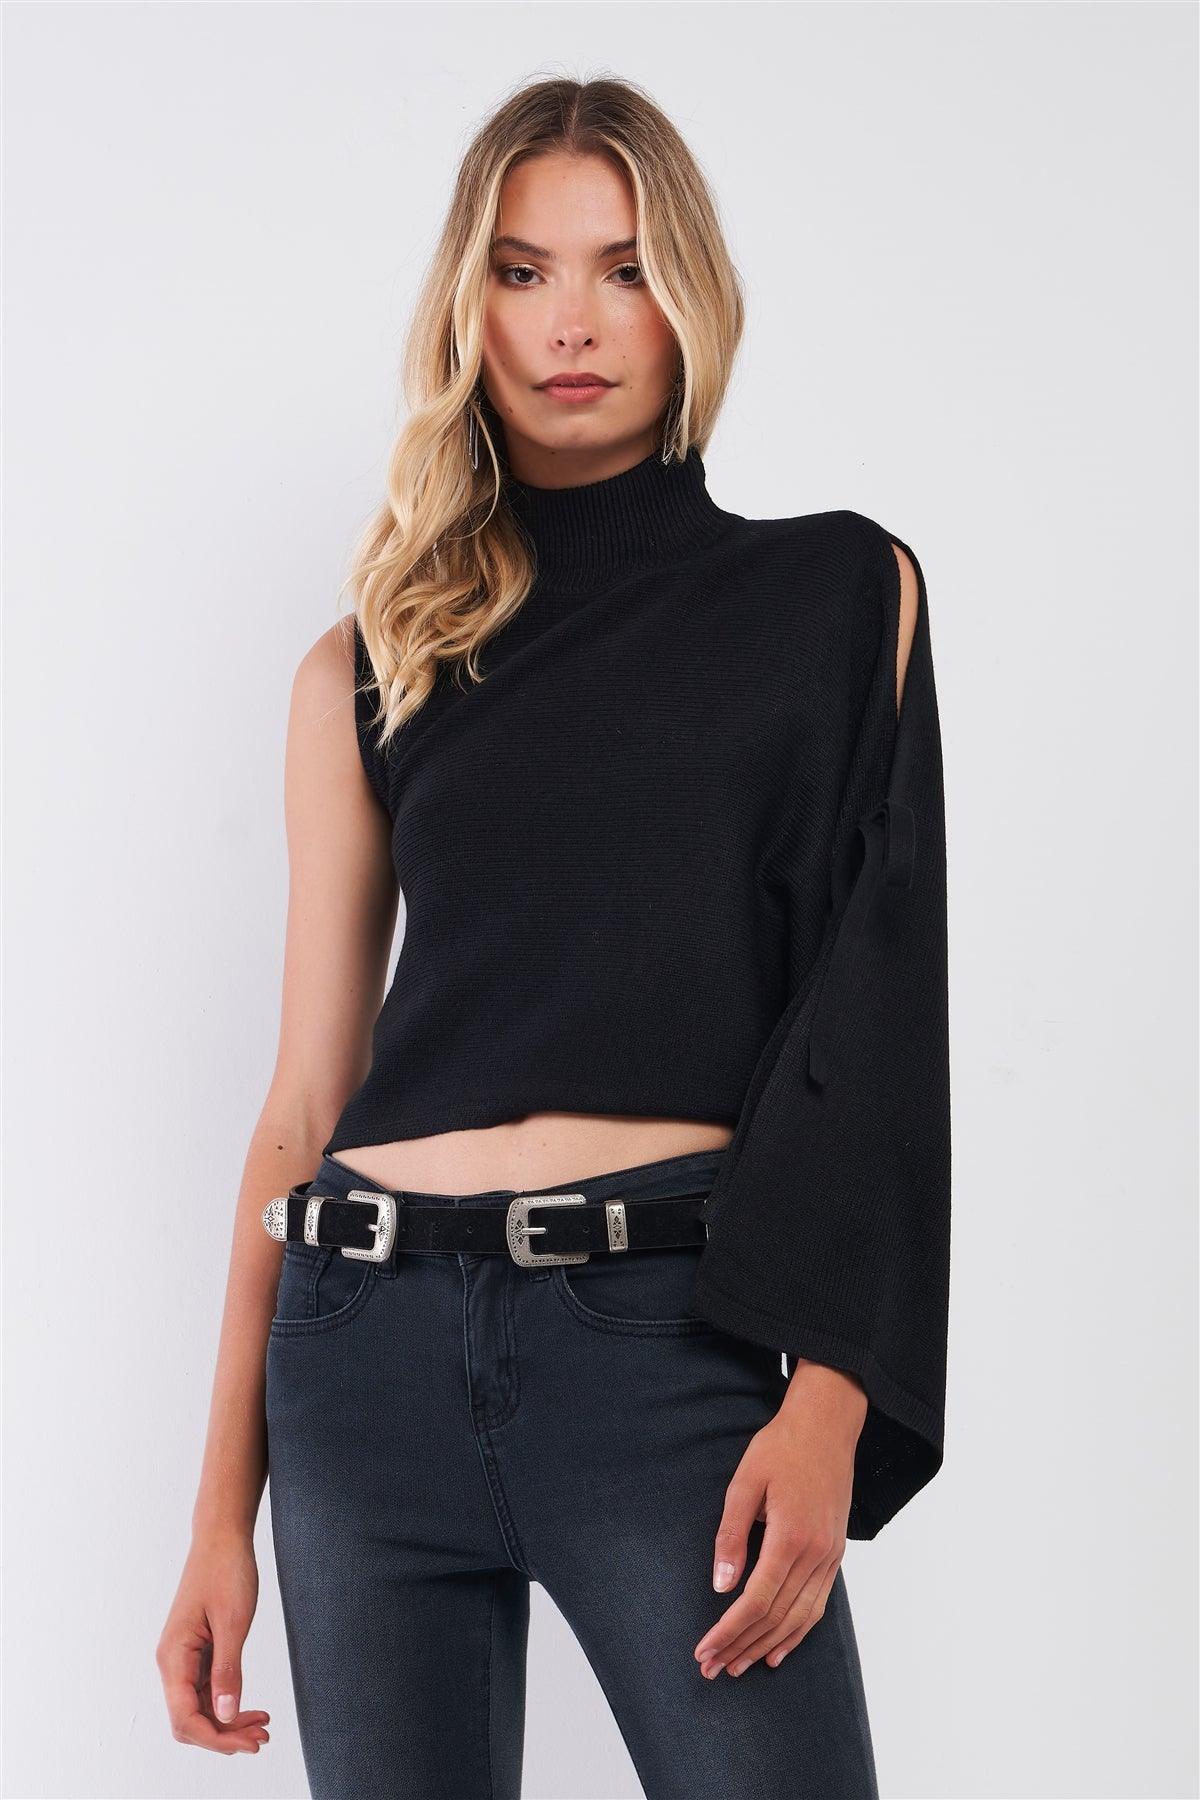 Black One-Shoulder Turtle Neck Bat Sleeve With Slit Cropped Sweaters /3-2-1